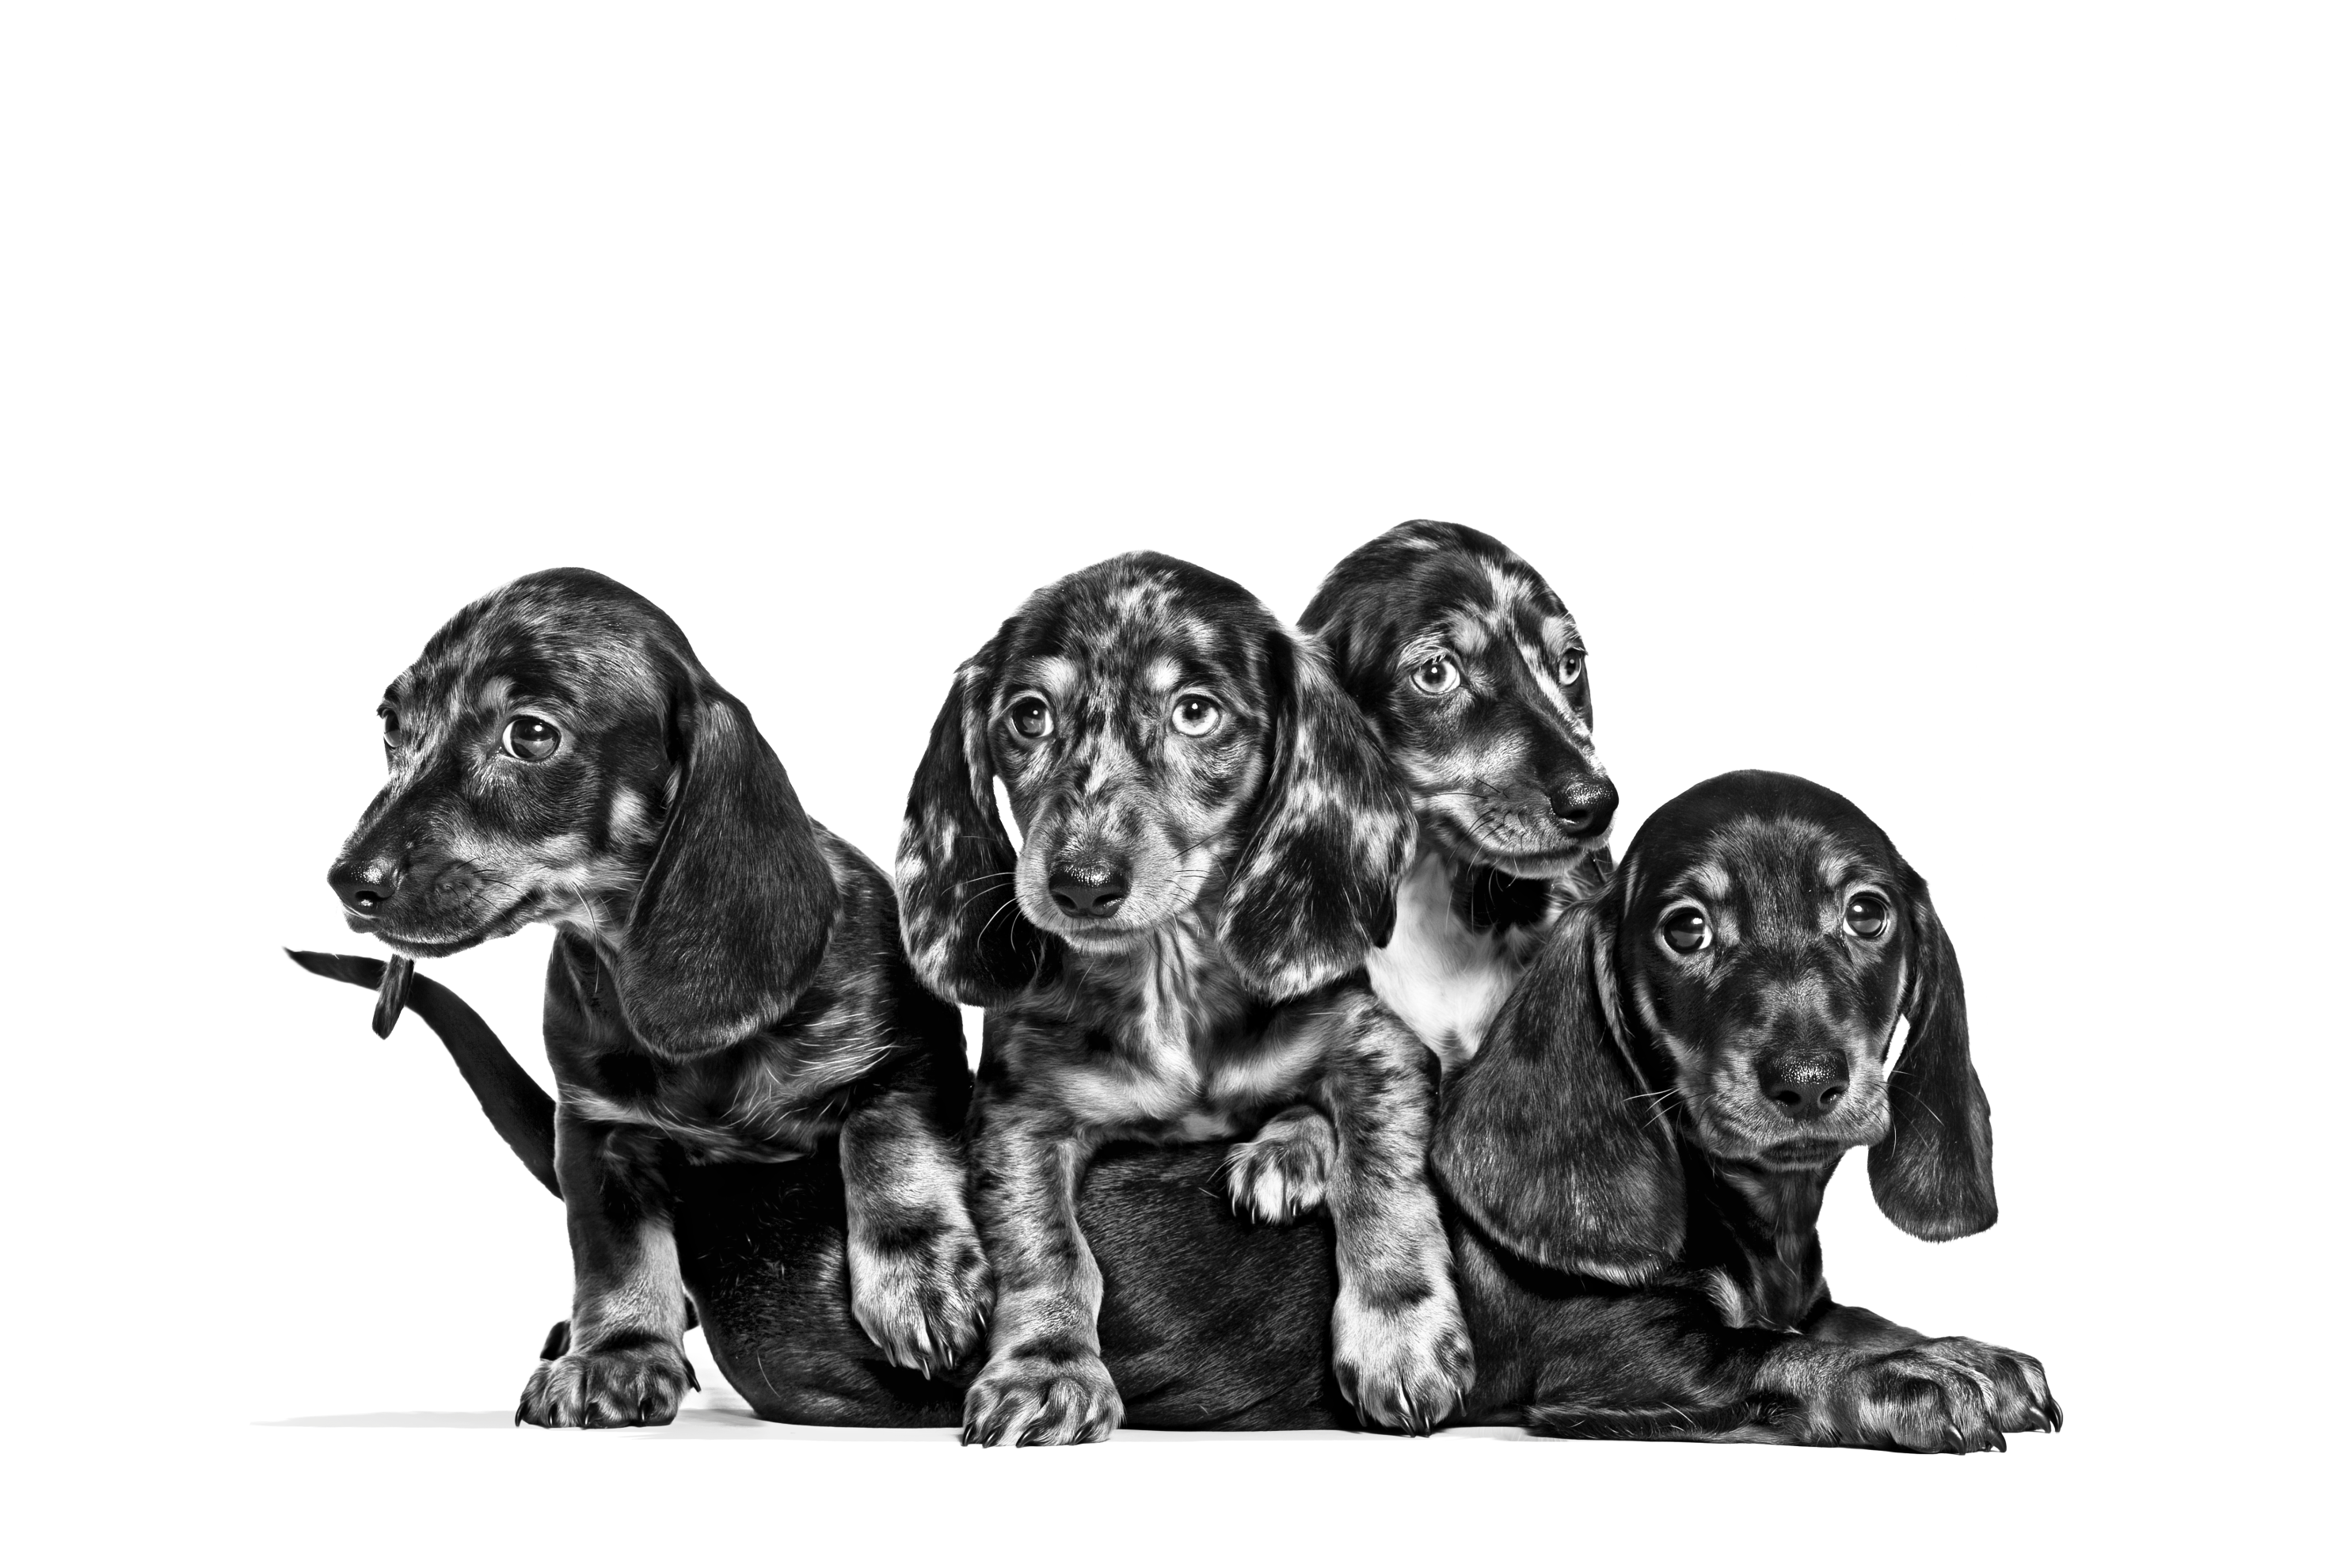 Dachshund mother and puppies in black and white on a white background